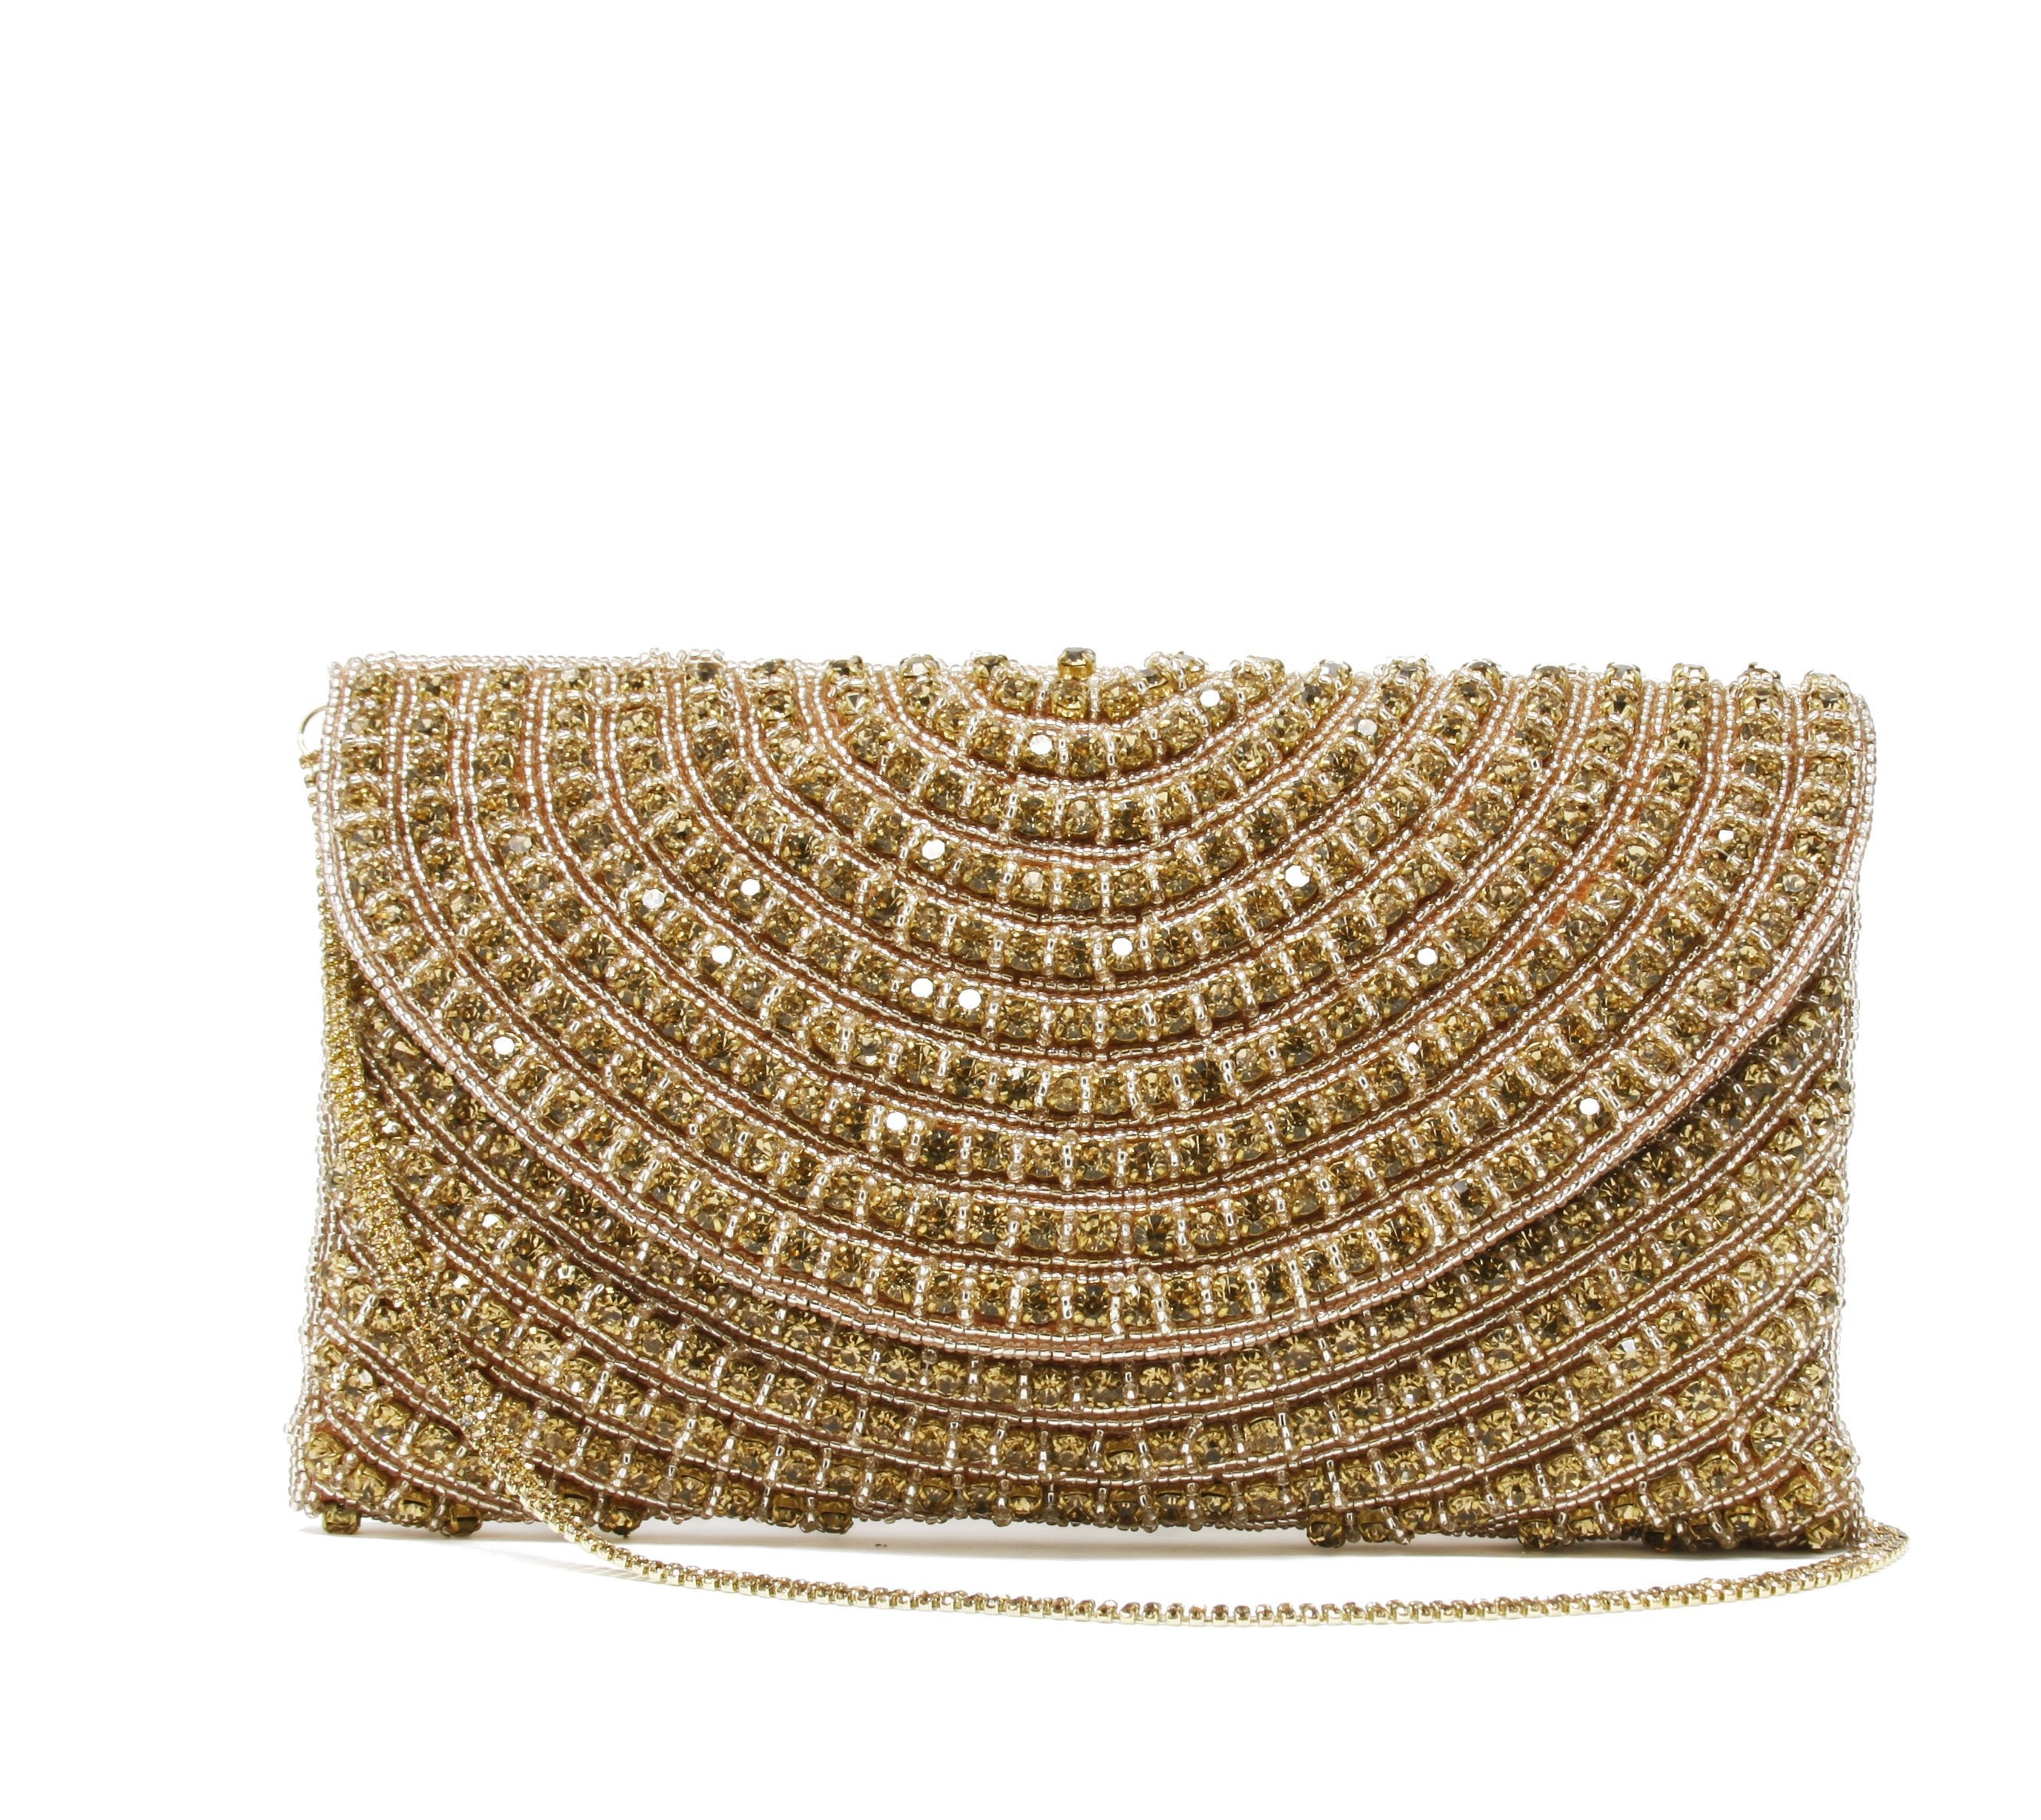 rose gold clutch Embroidered with rhinestone wristlet strap